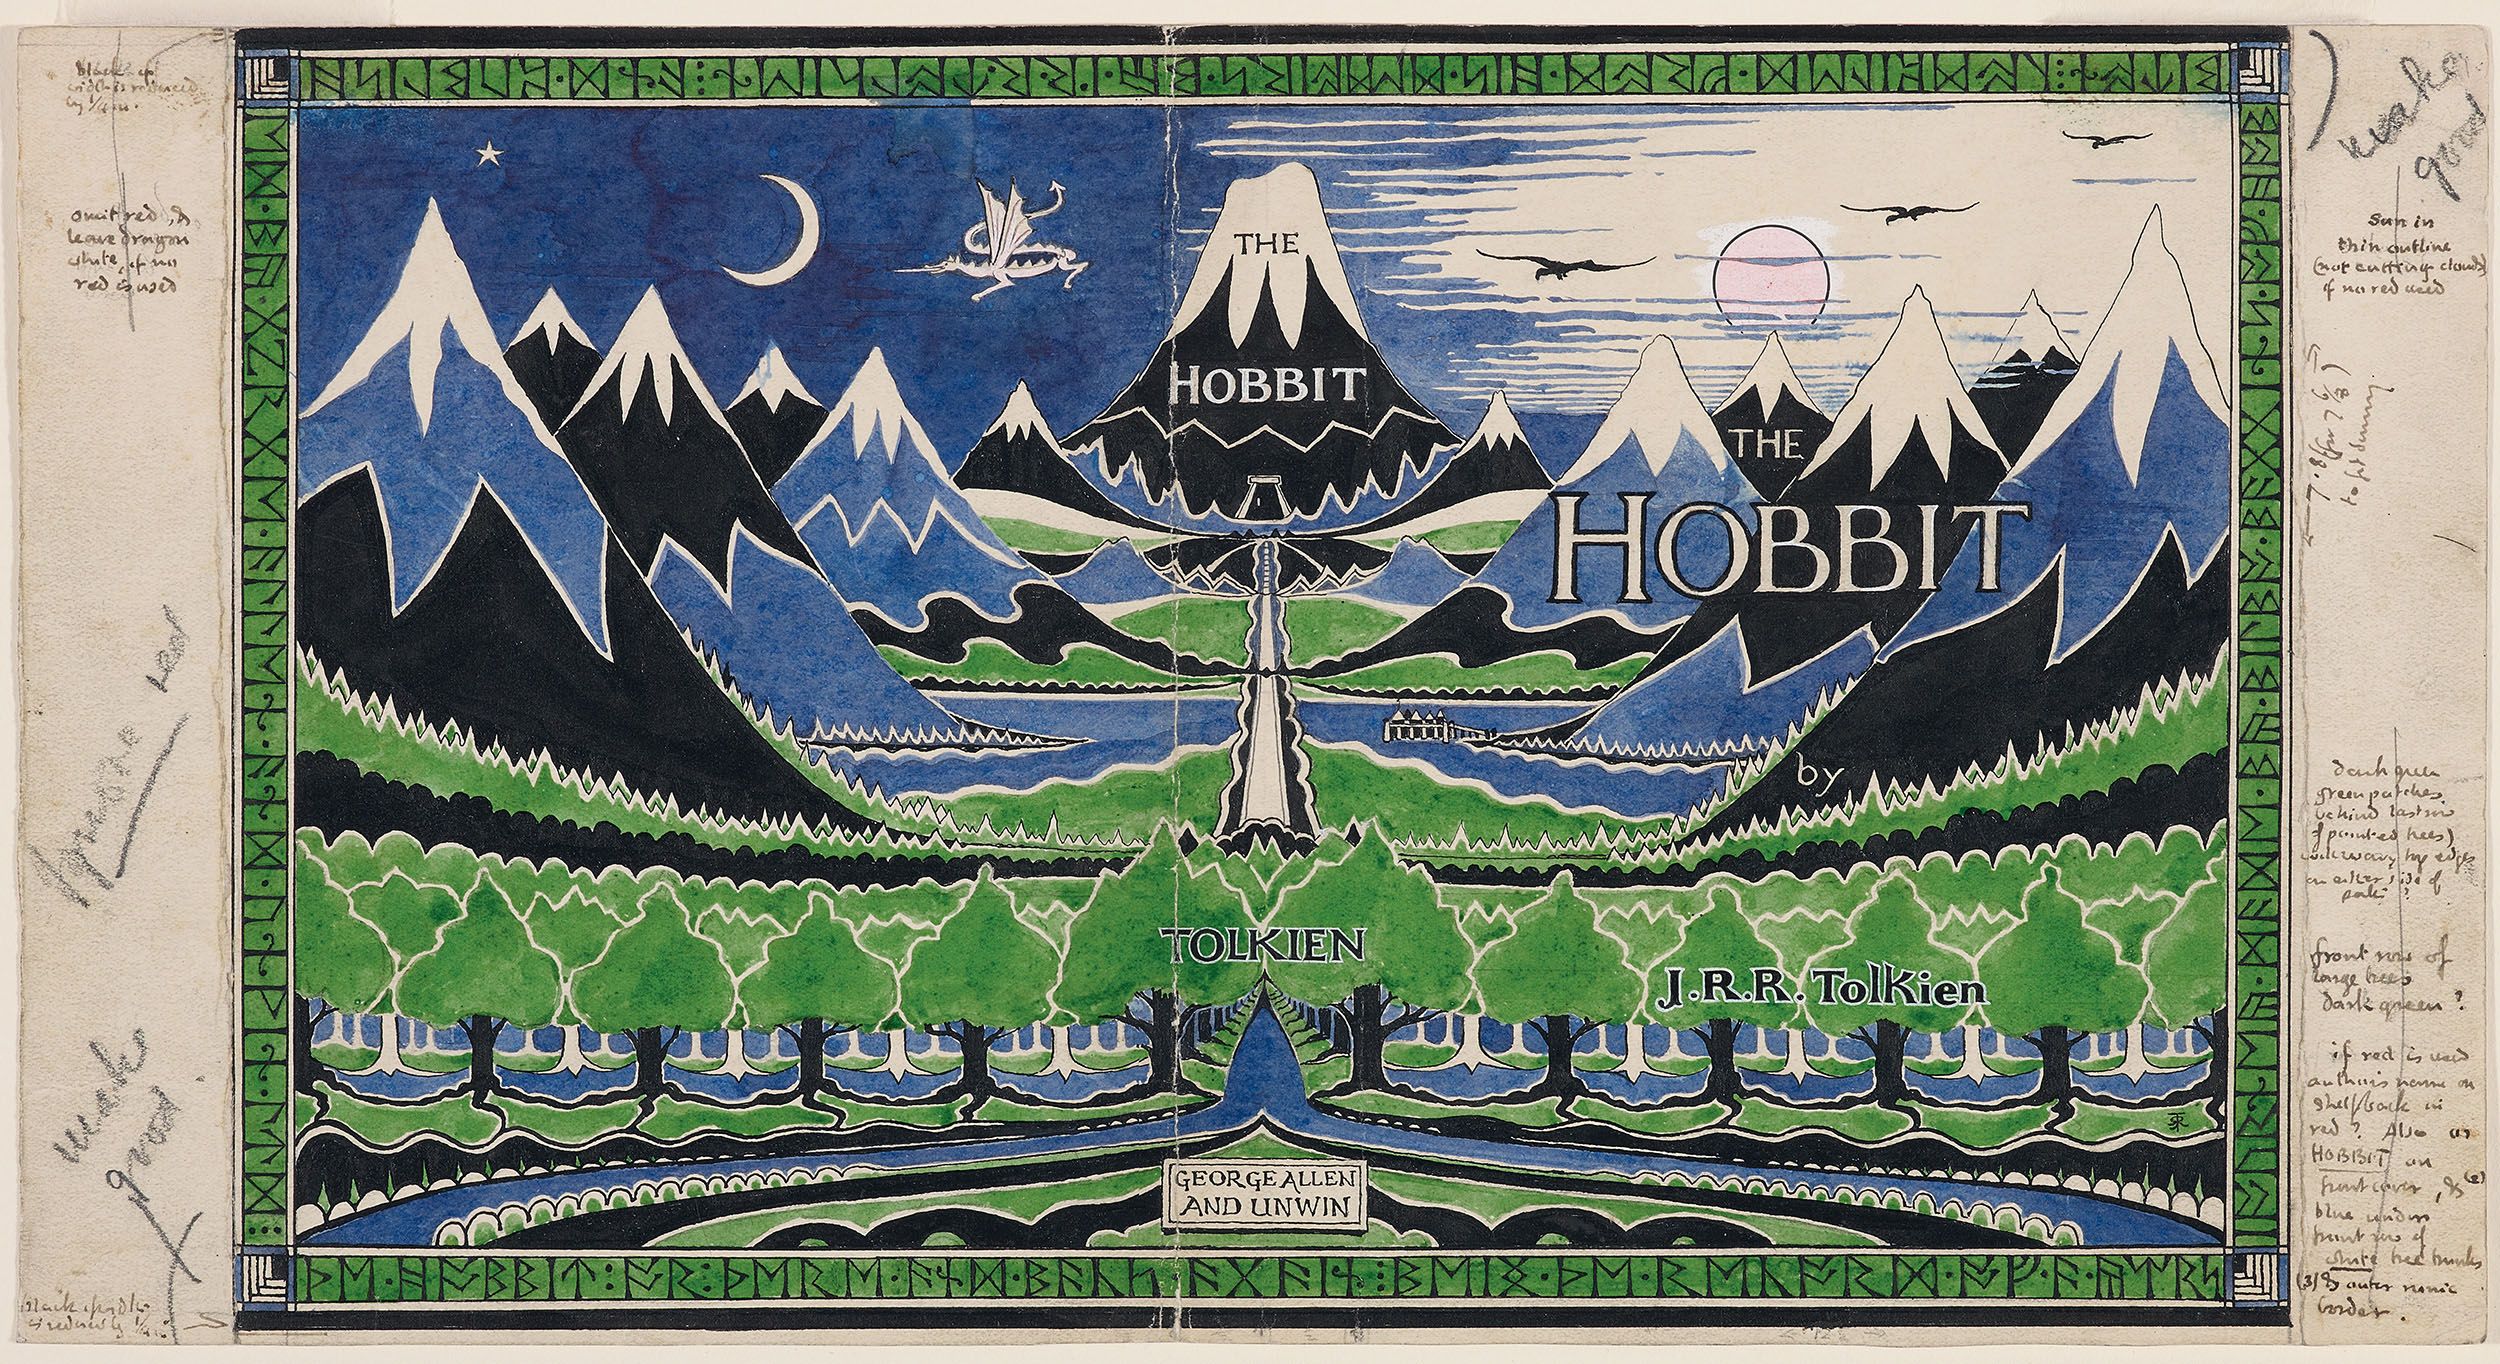 J.R.R. Tolkien show reveals Middle-earth mastermind's unseen art